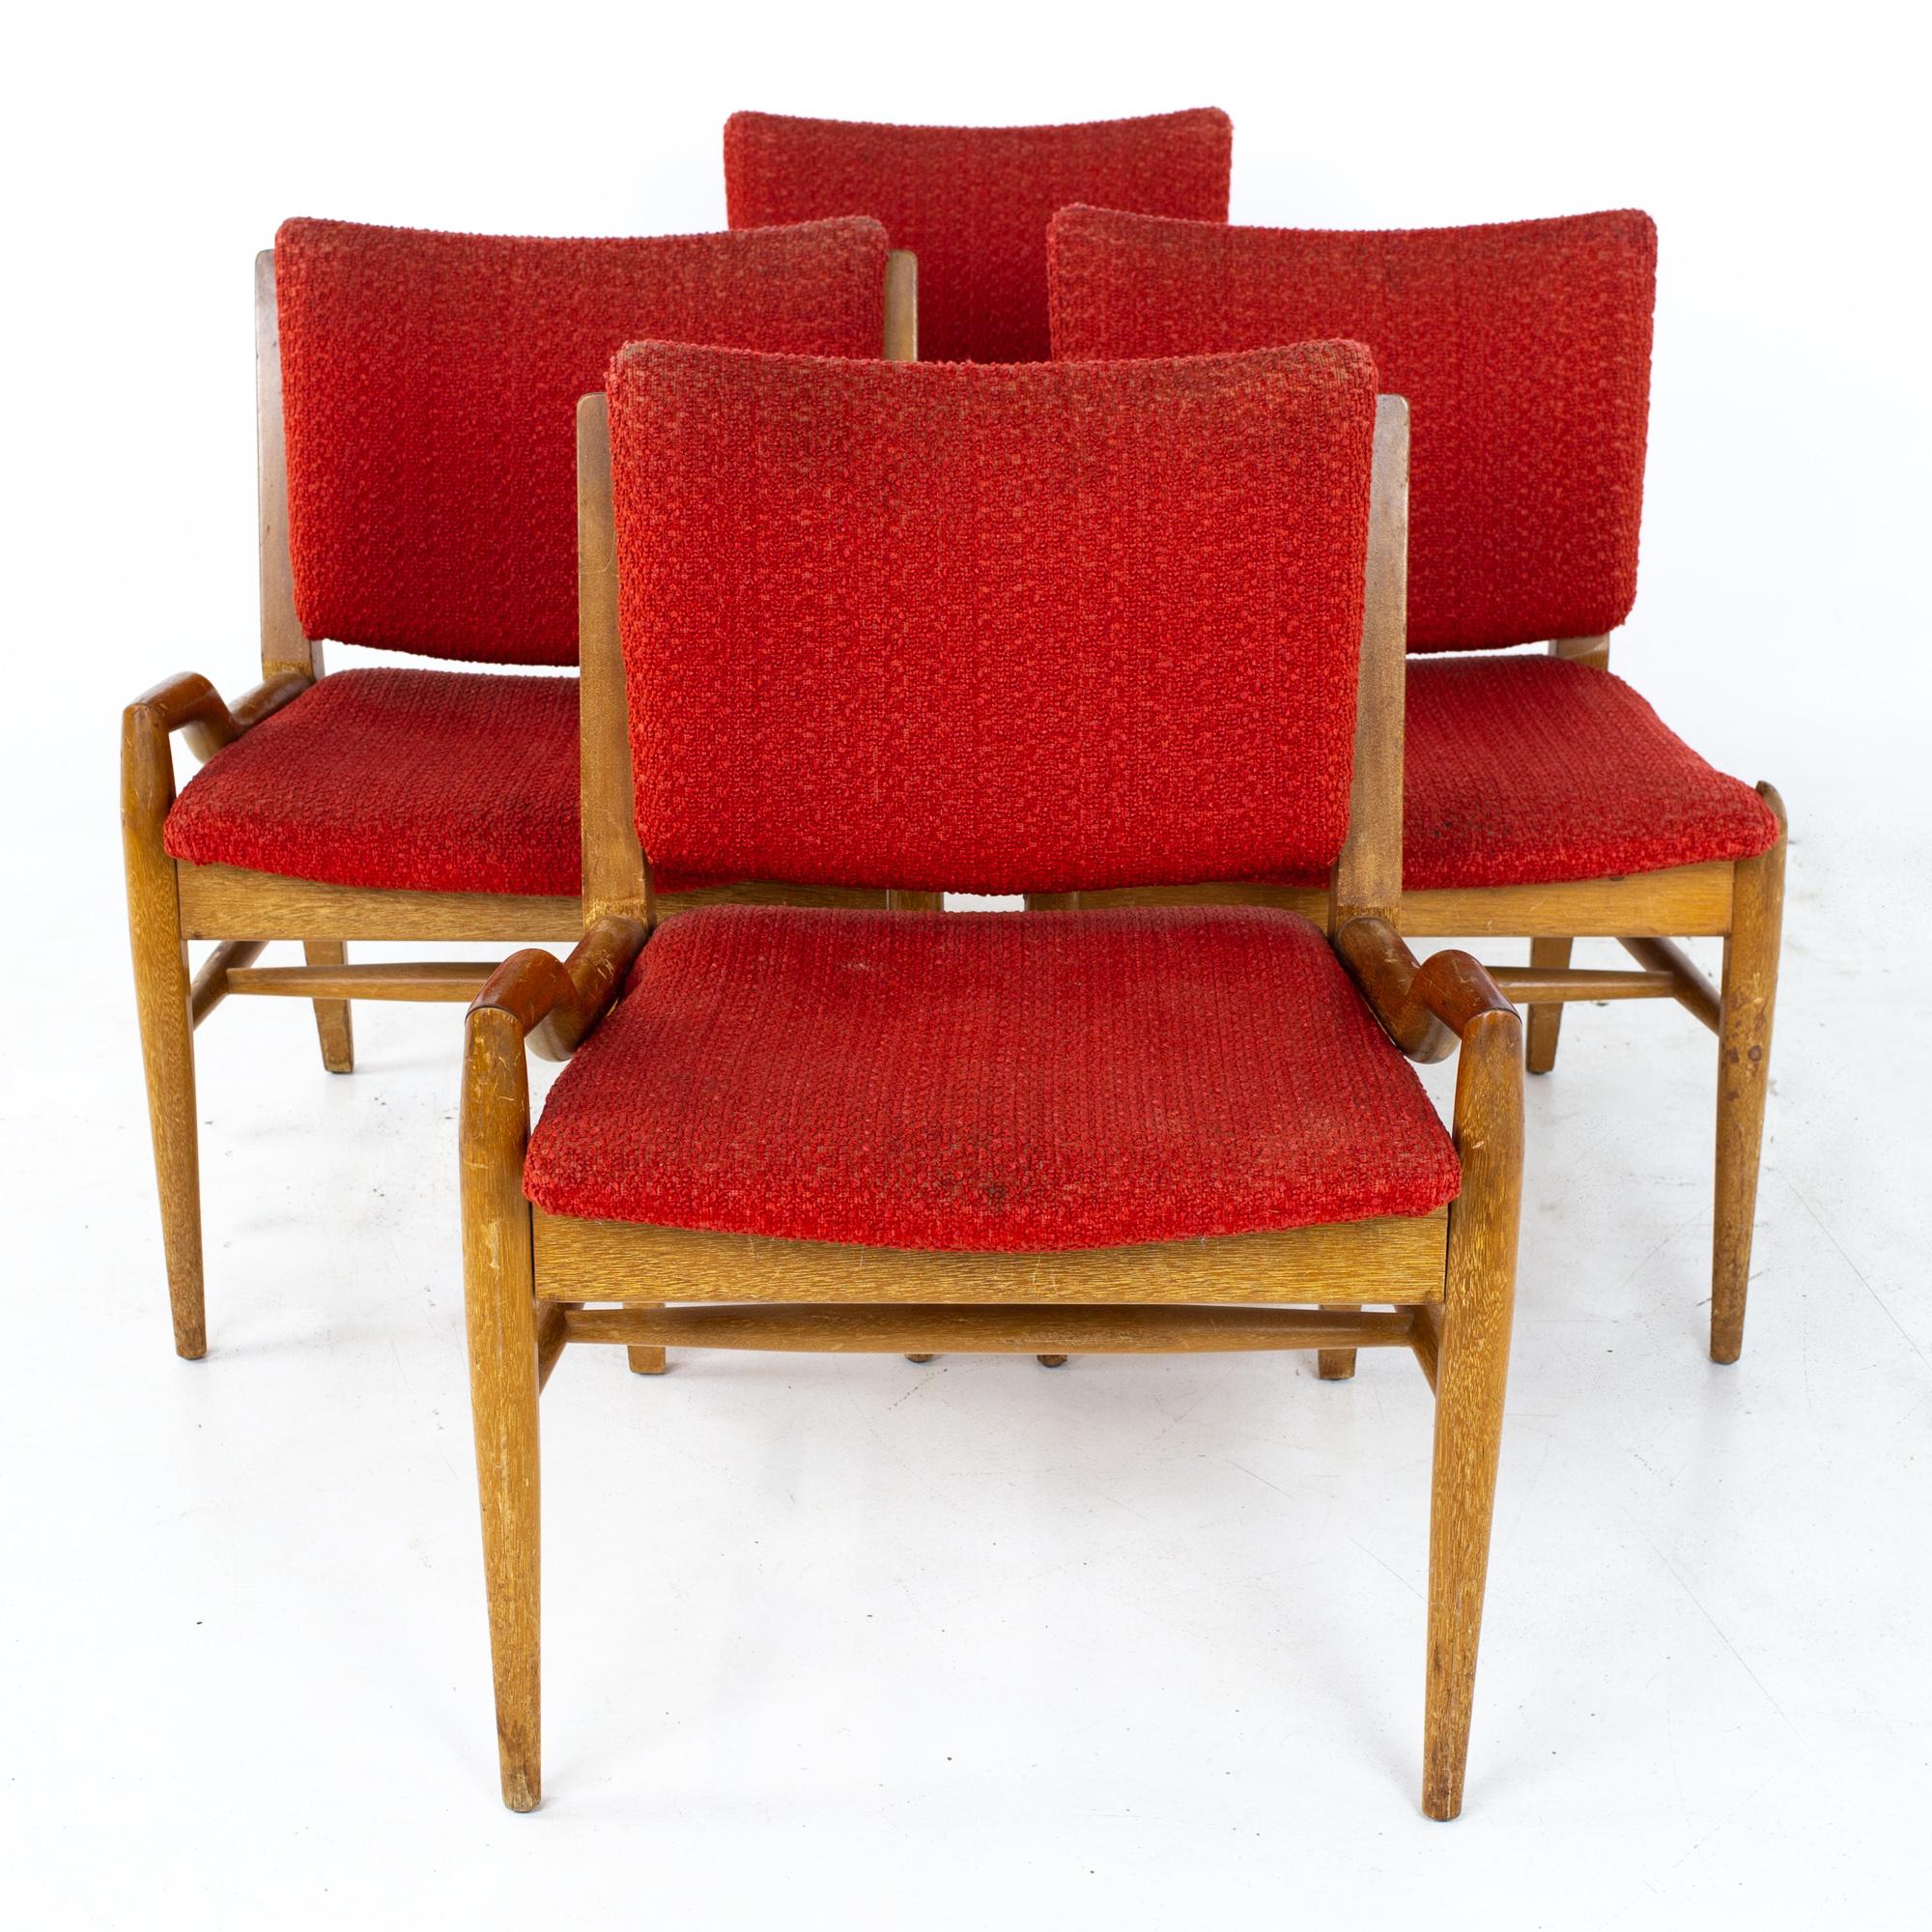 John Keal for Brown Saltman mid century mahogany dining chairs - Set of 4
Each chair measures: 22.5 wide x 20.25 deep x 29.5 high, with a seat height of 17 inches and an arm height and chair clearance of 19.25 inches

All pieces of furniture can